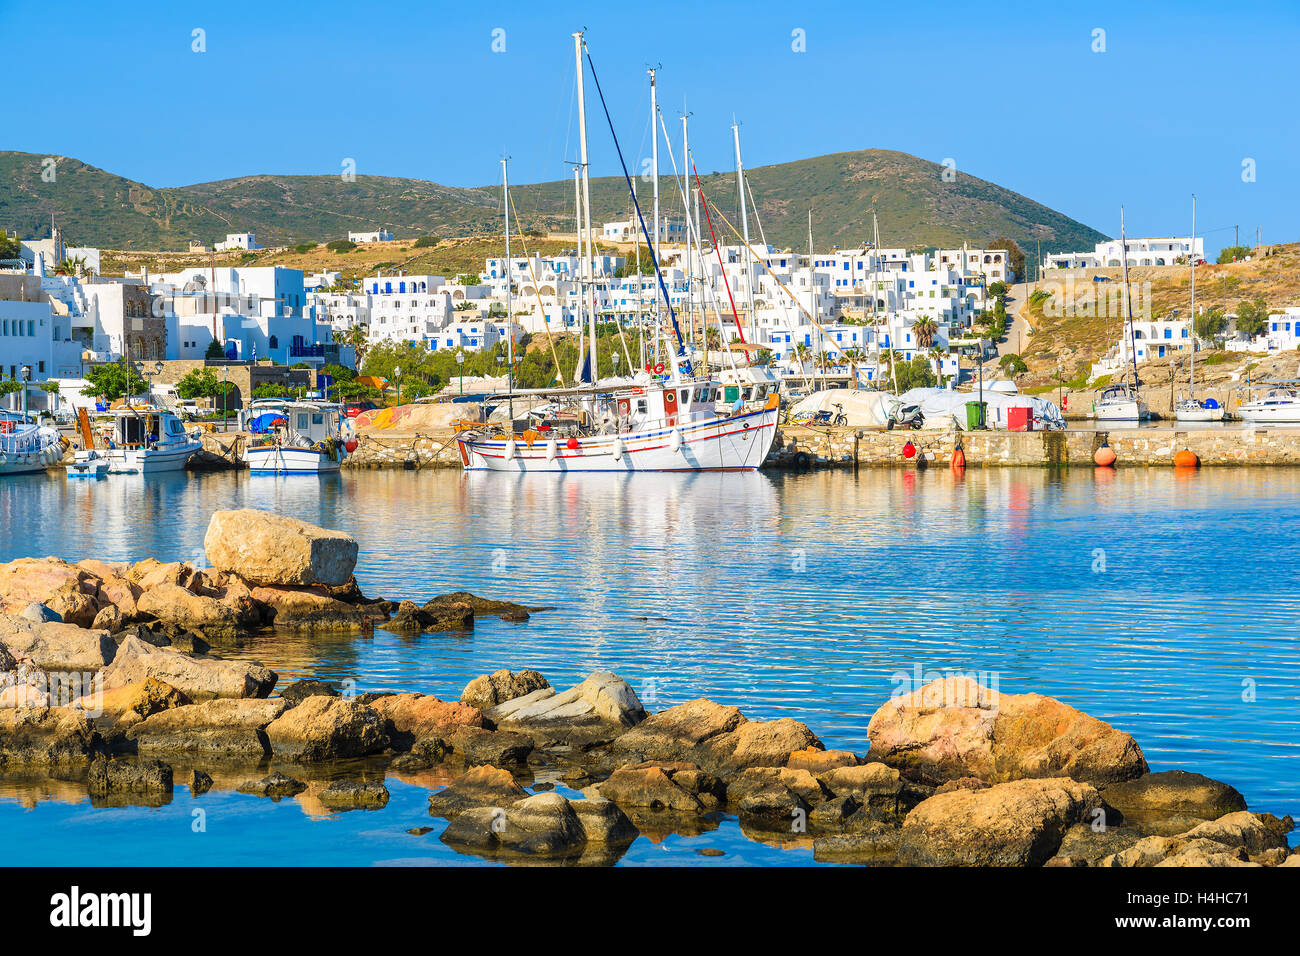 A view of Naoussa fishing port at sunset time, Paros island, Cyclades, Greece Stock Photo